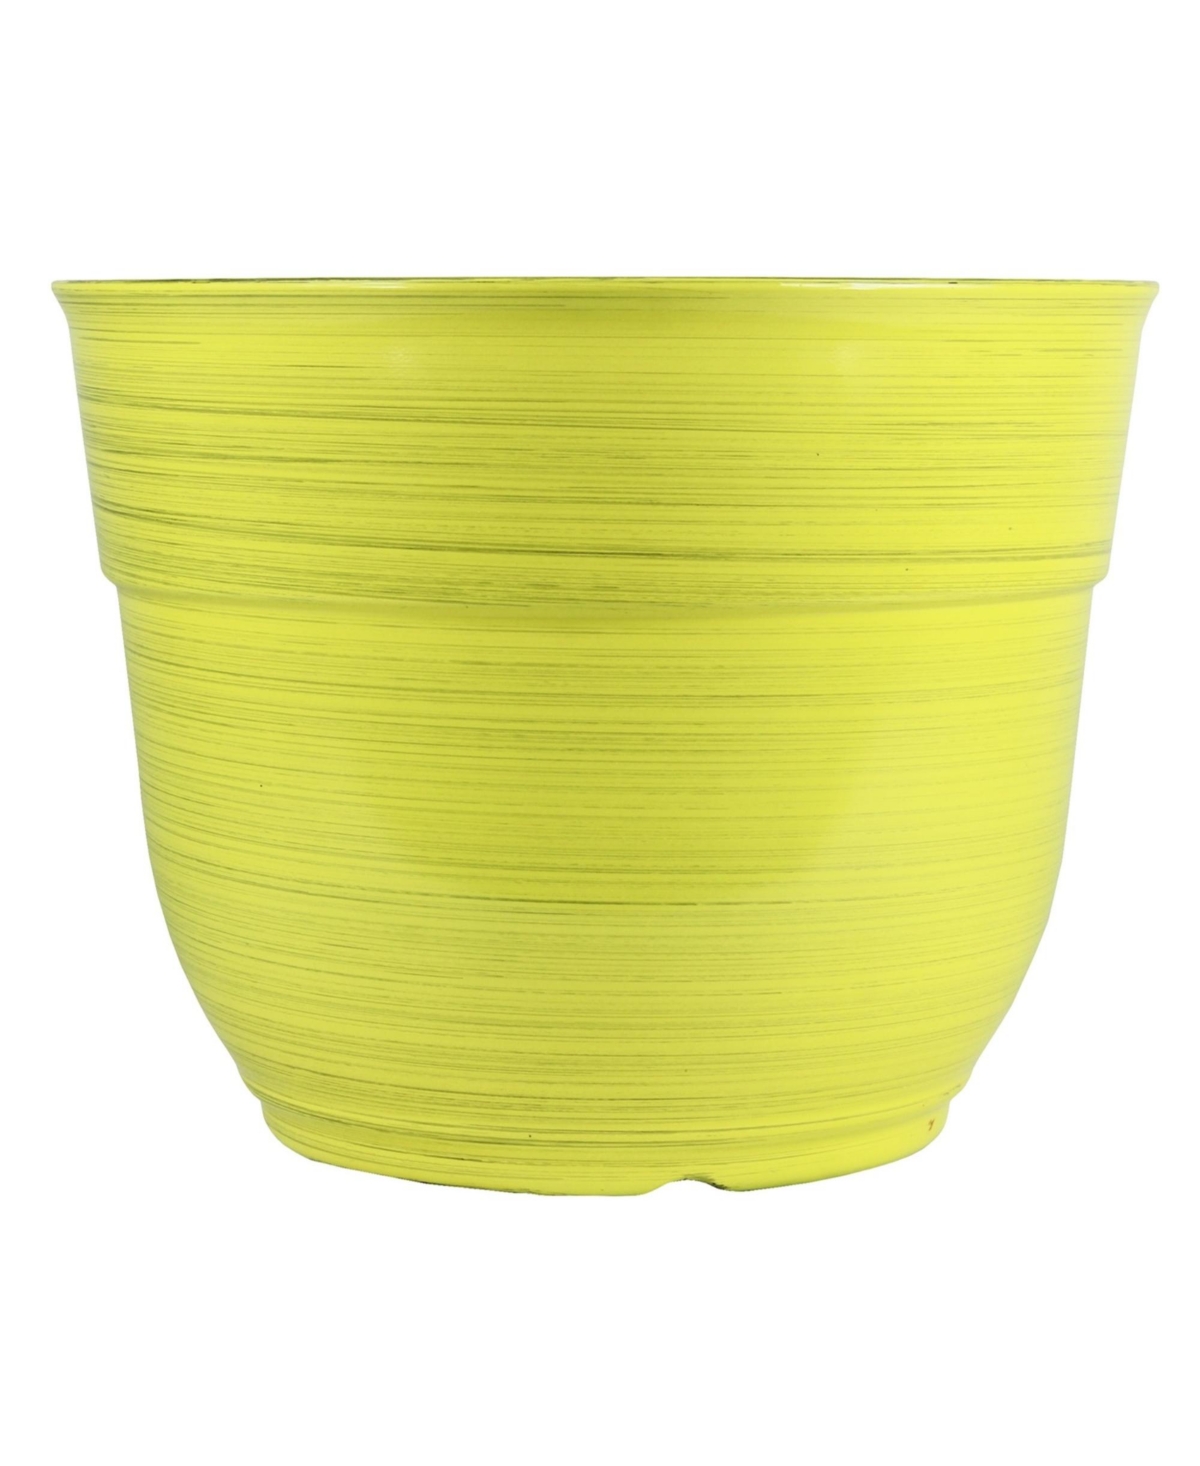 Glazed Brushed Happy Large Plastic Planter Bright Yellow 15 Inches - Yellow